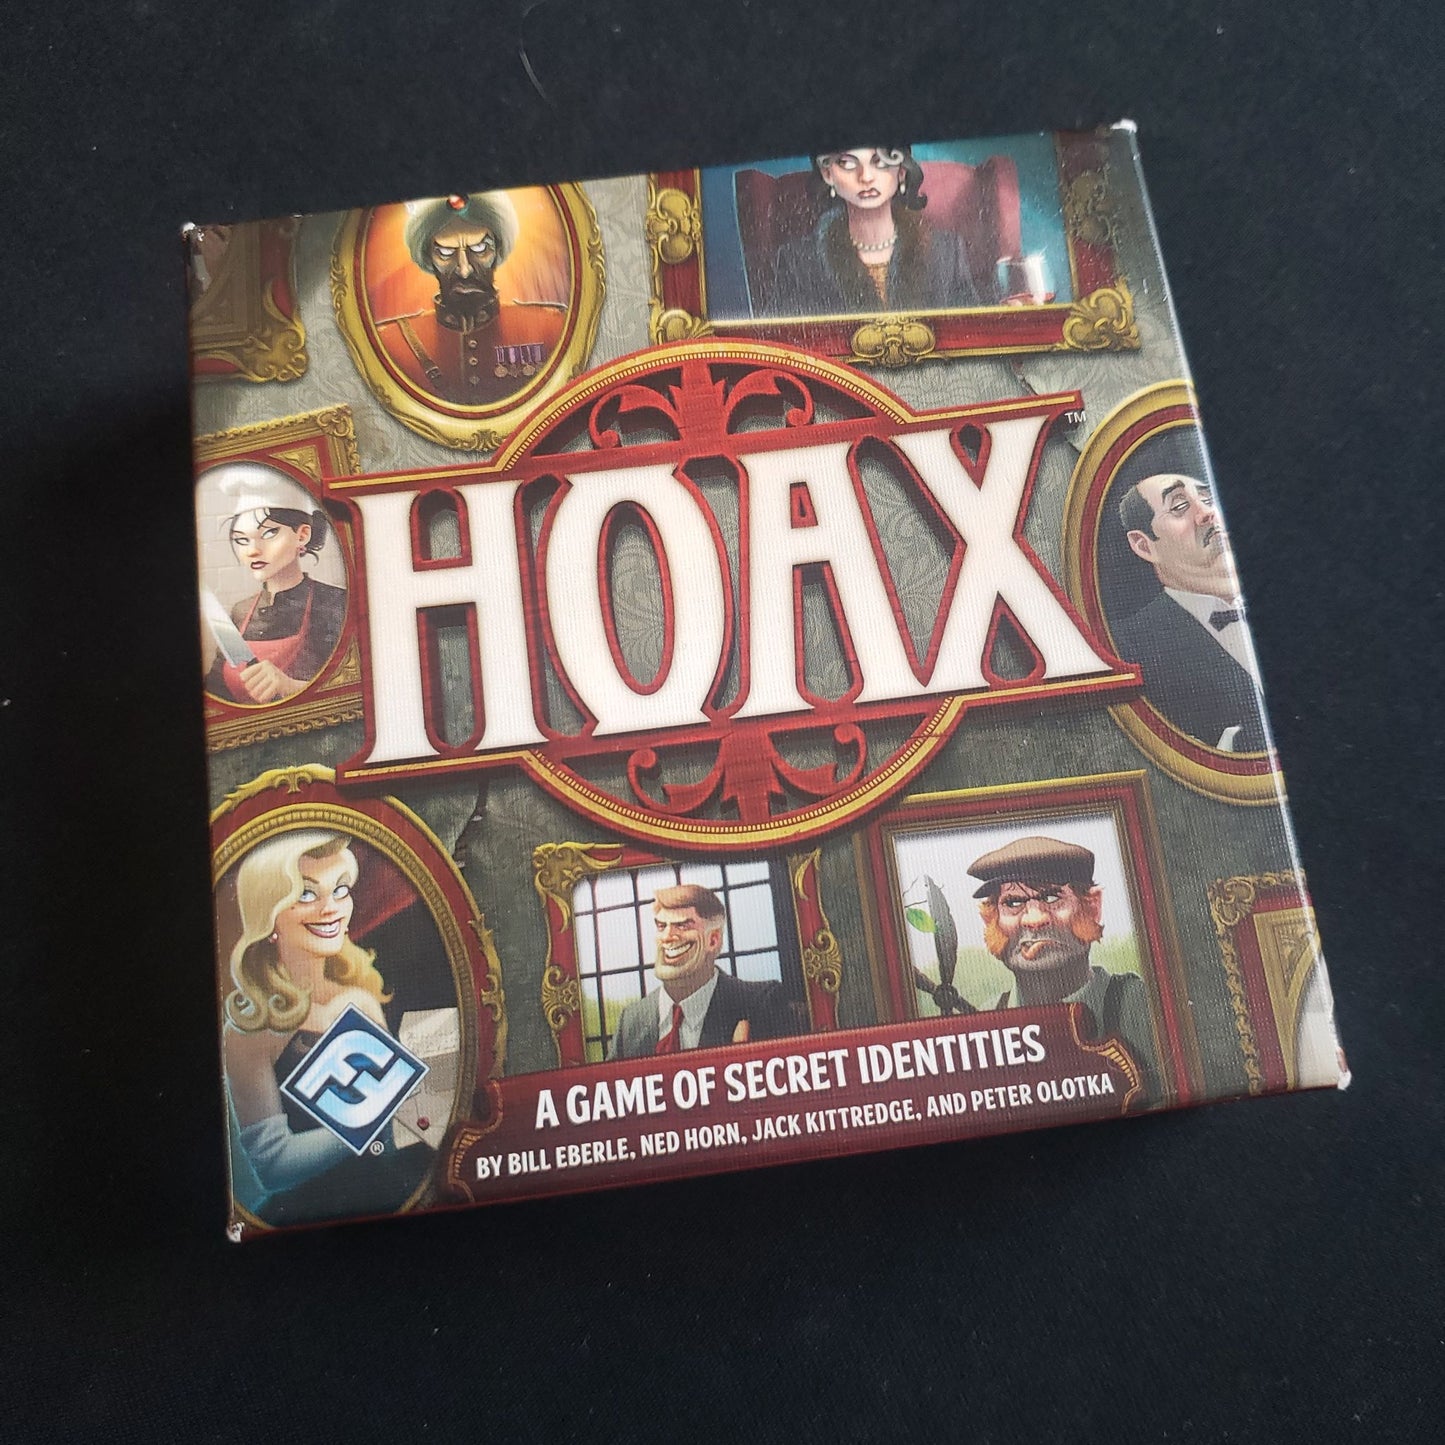 Image shows the front cover of the box of the Hoax card game